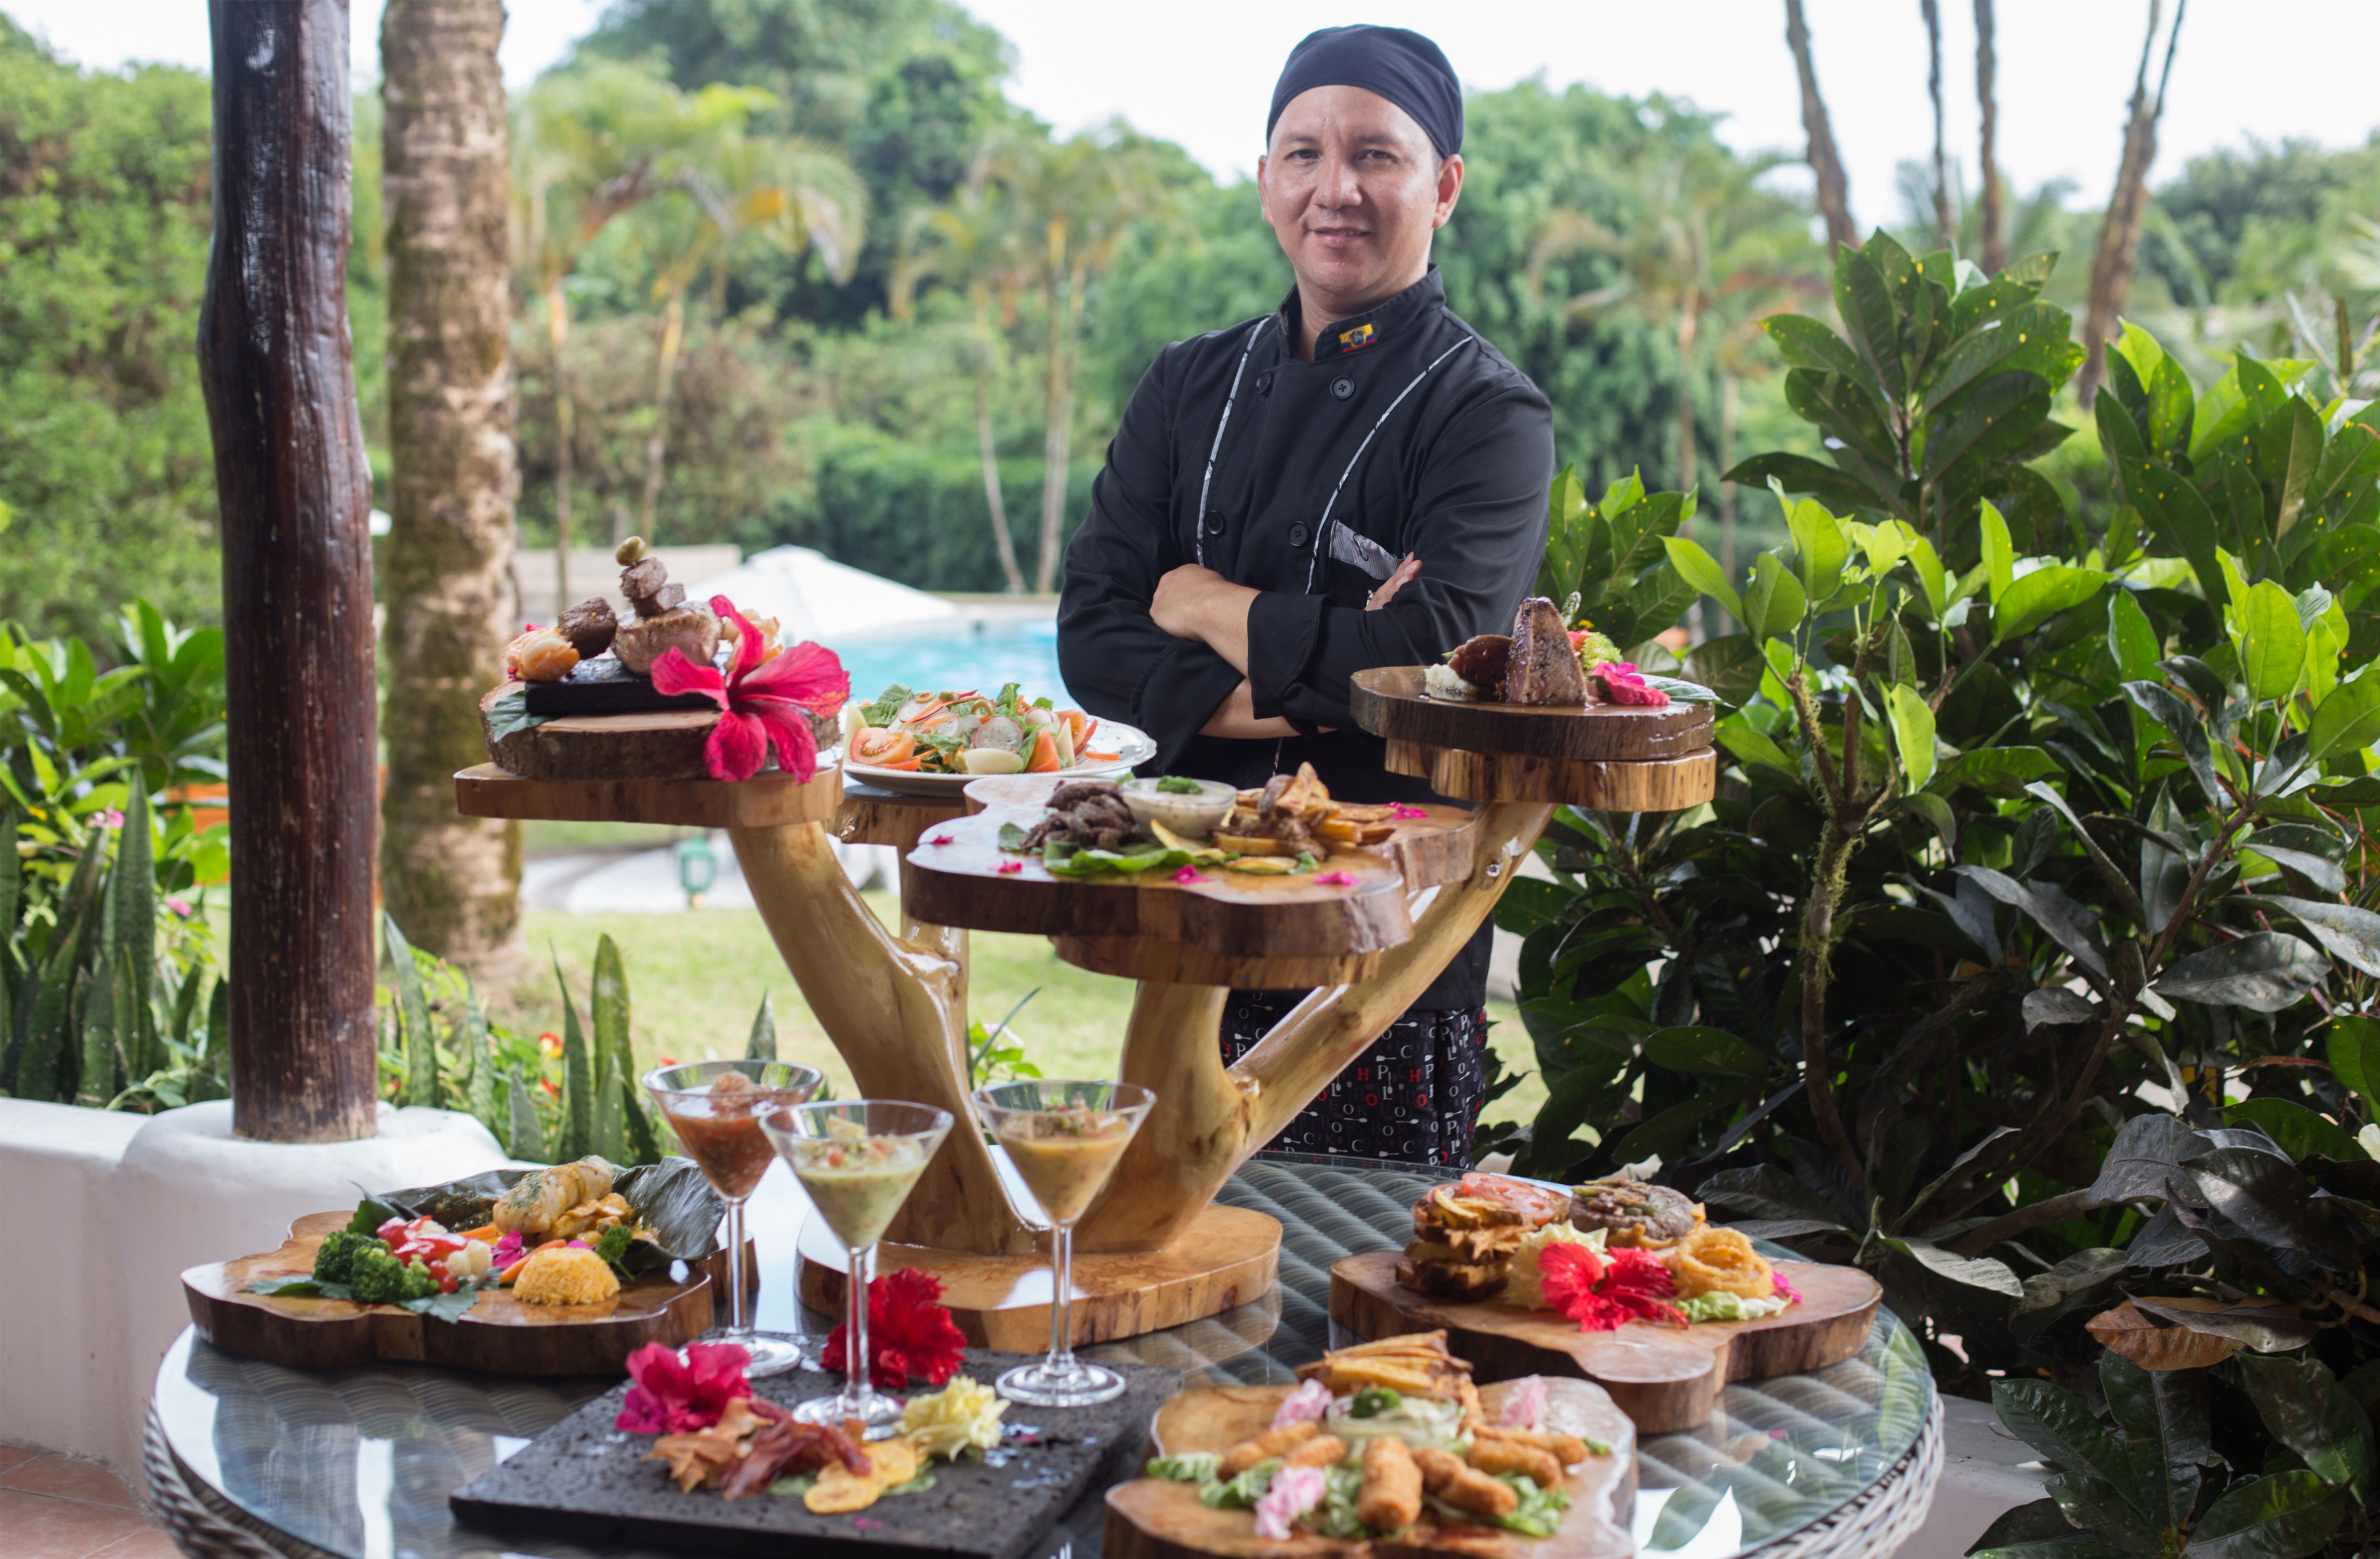 Chef with food and drinks display